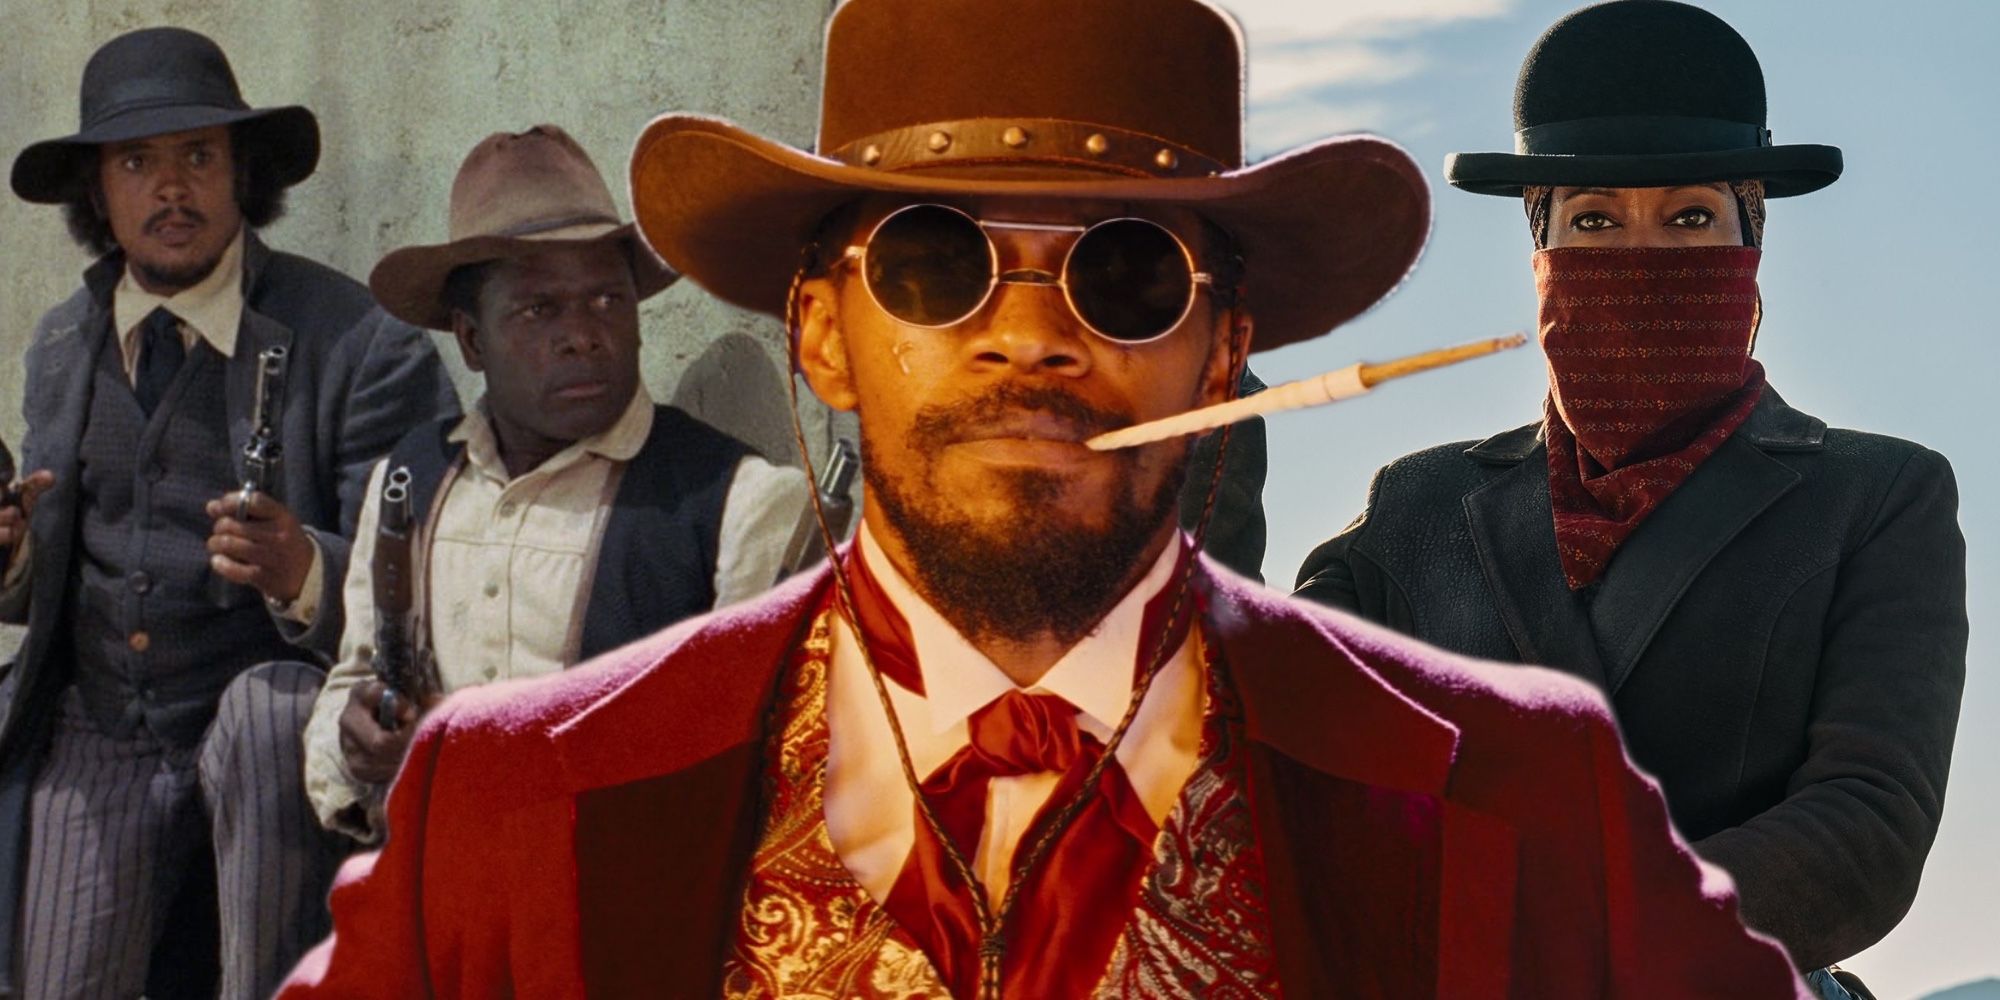 The 15 Best Black Cowboy Movies & Westerns To Watch Now